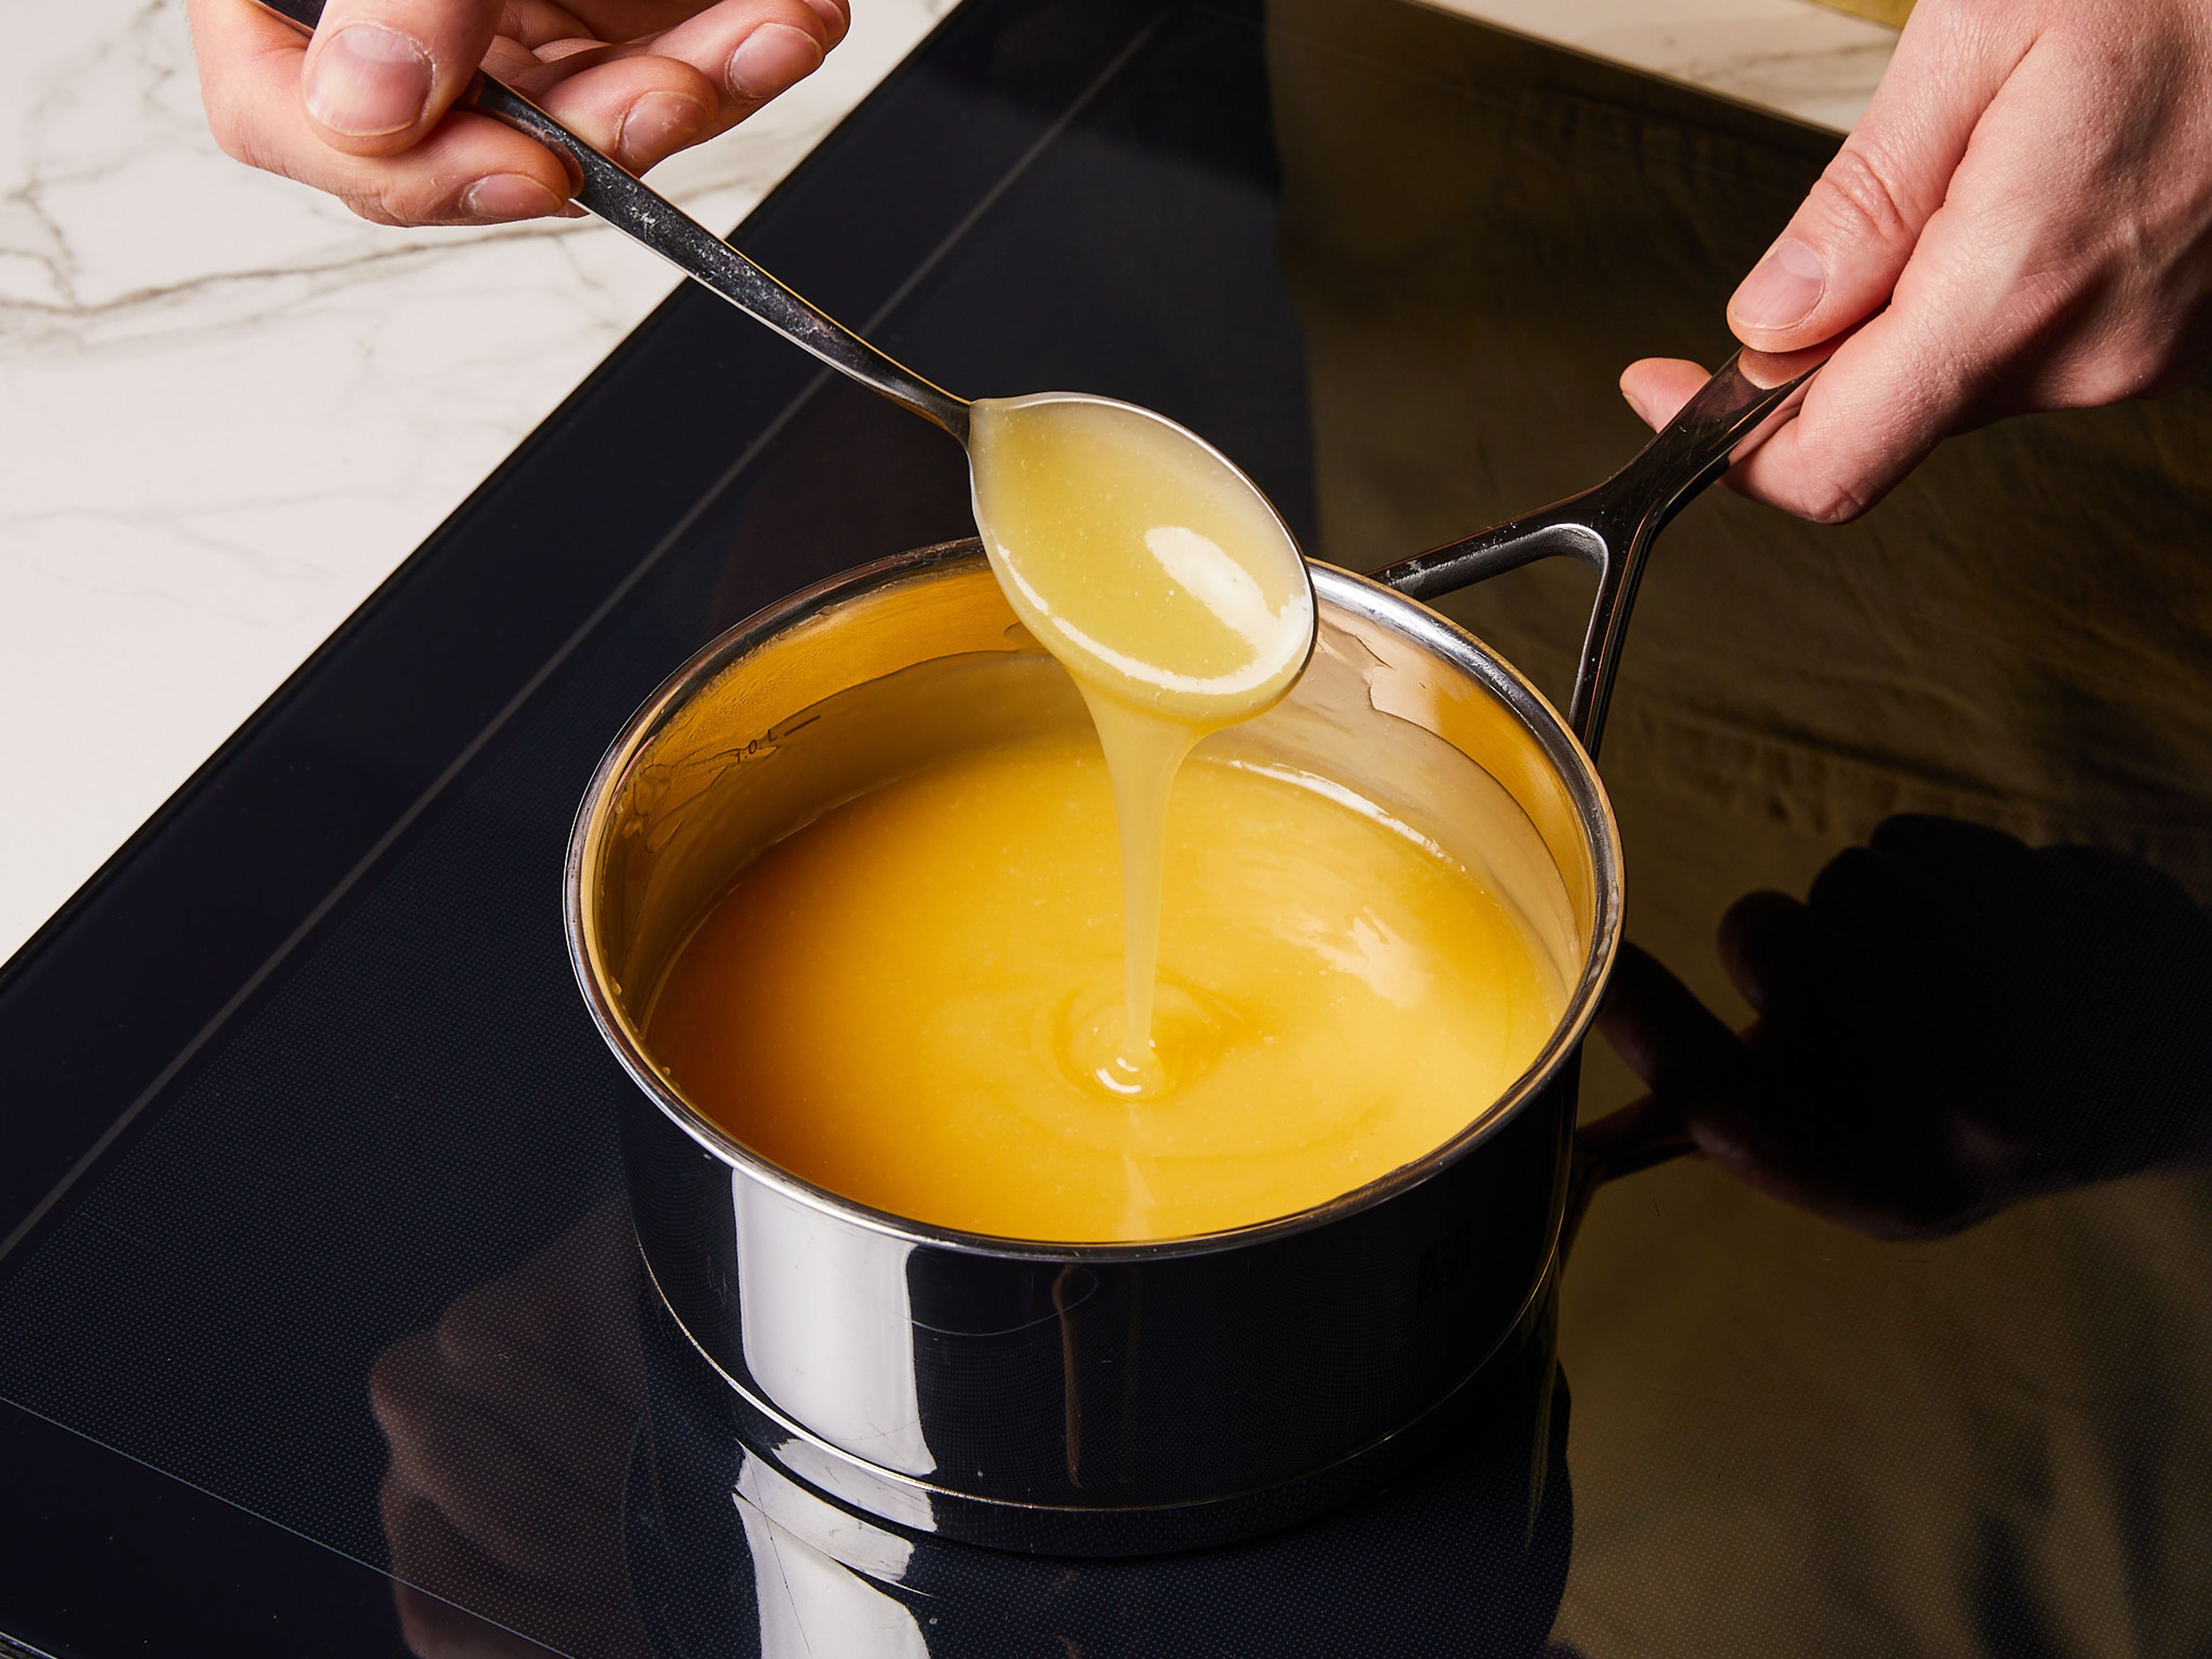 For the lemon curd, in the same saucepan, mix lemon juice, cornflour, sugar, water, butter, limoncello, and egg yolks. Bring to a boil while stirring constantly until thick in consistency for approx. 2 min. Then, remove from heat, cover, and set aside.